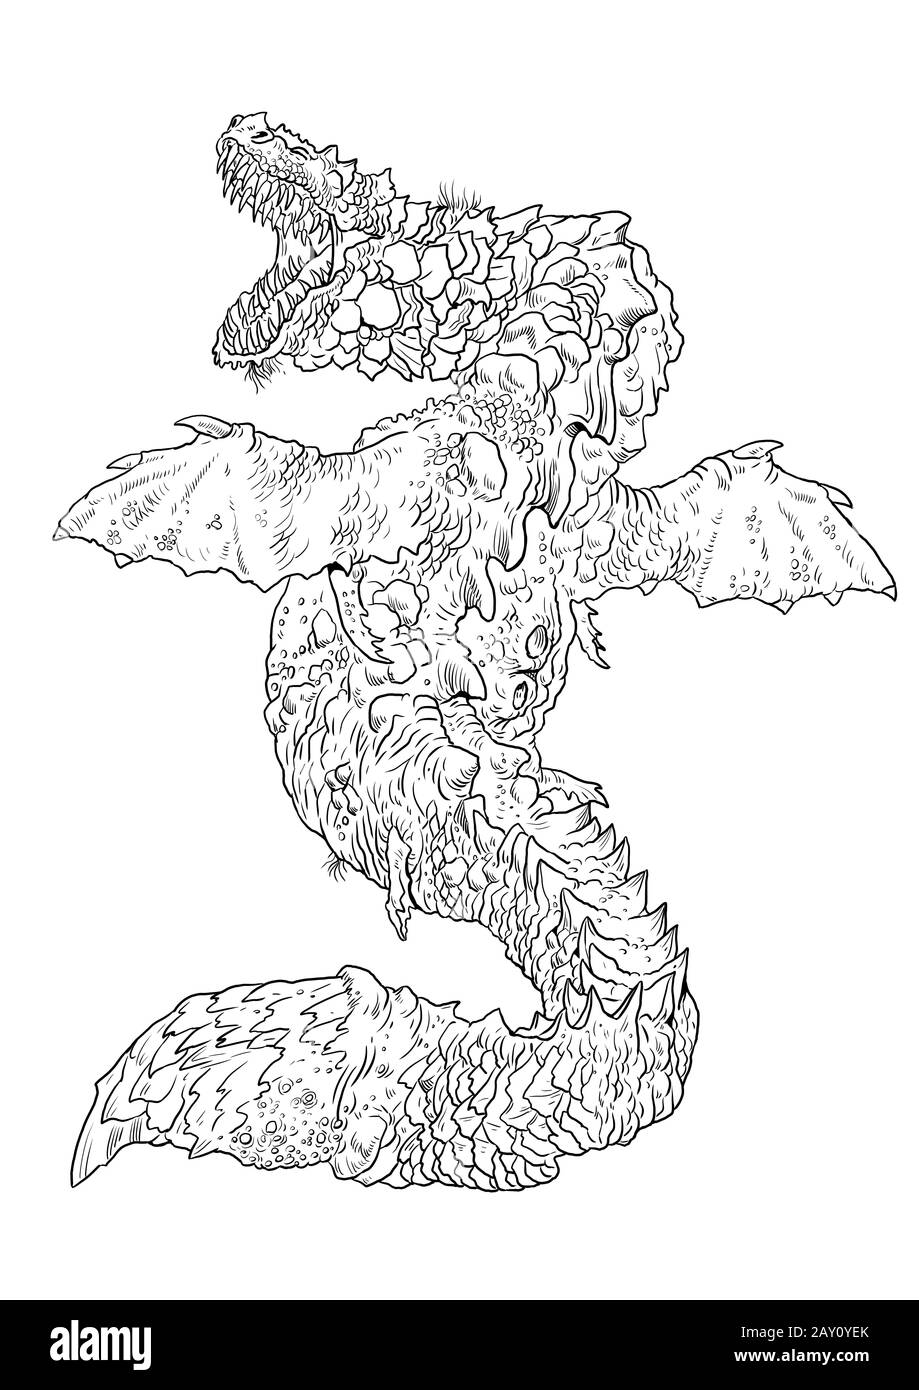 Underwater dragon coloring page. Outline illustration. Dragon drawing coloring sheet. Stock Photo